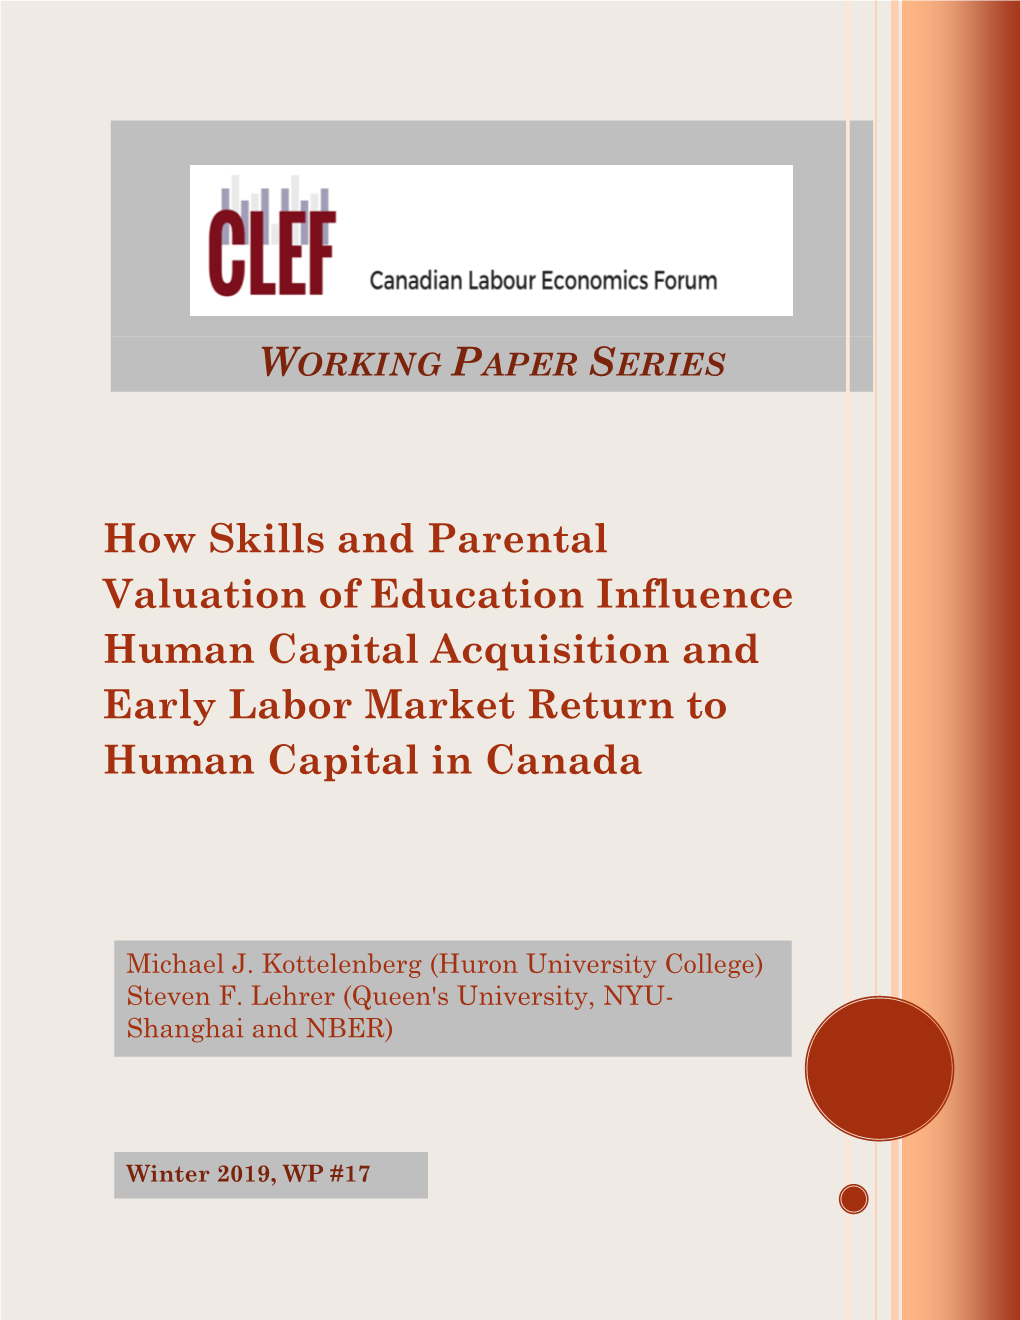 How Skills and Parental Valuation of Education Influence Human Capital Acquisition and Early Labor Market Return to Human Capital in Canada